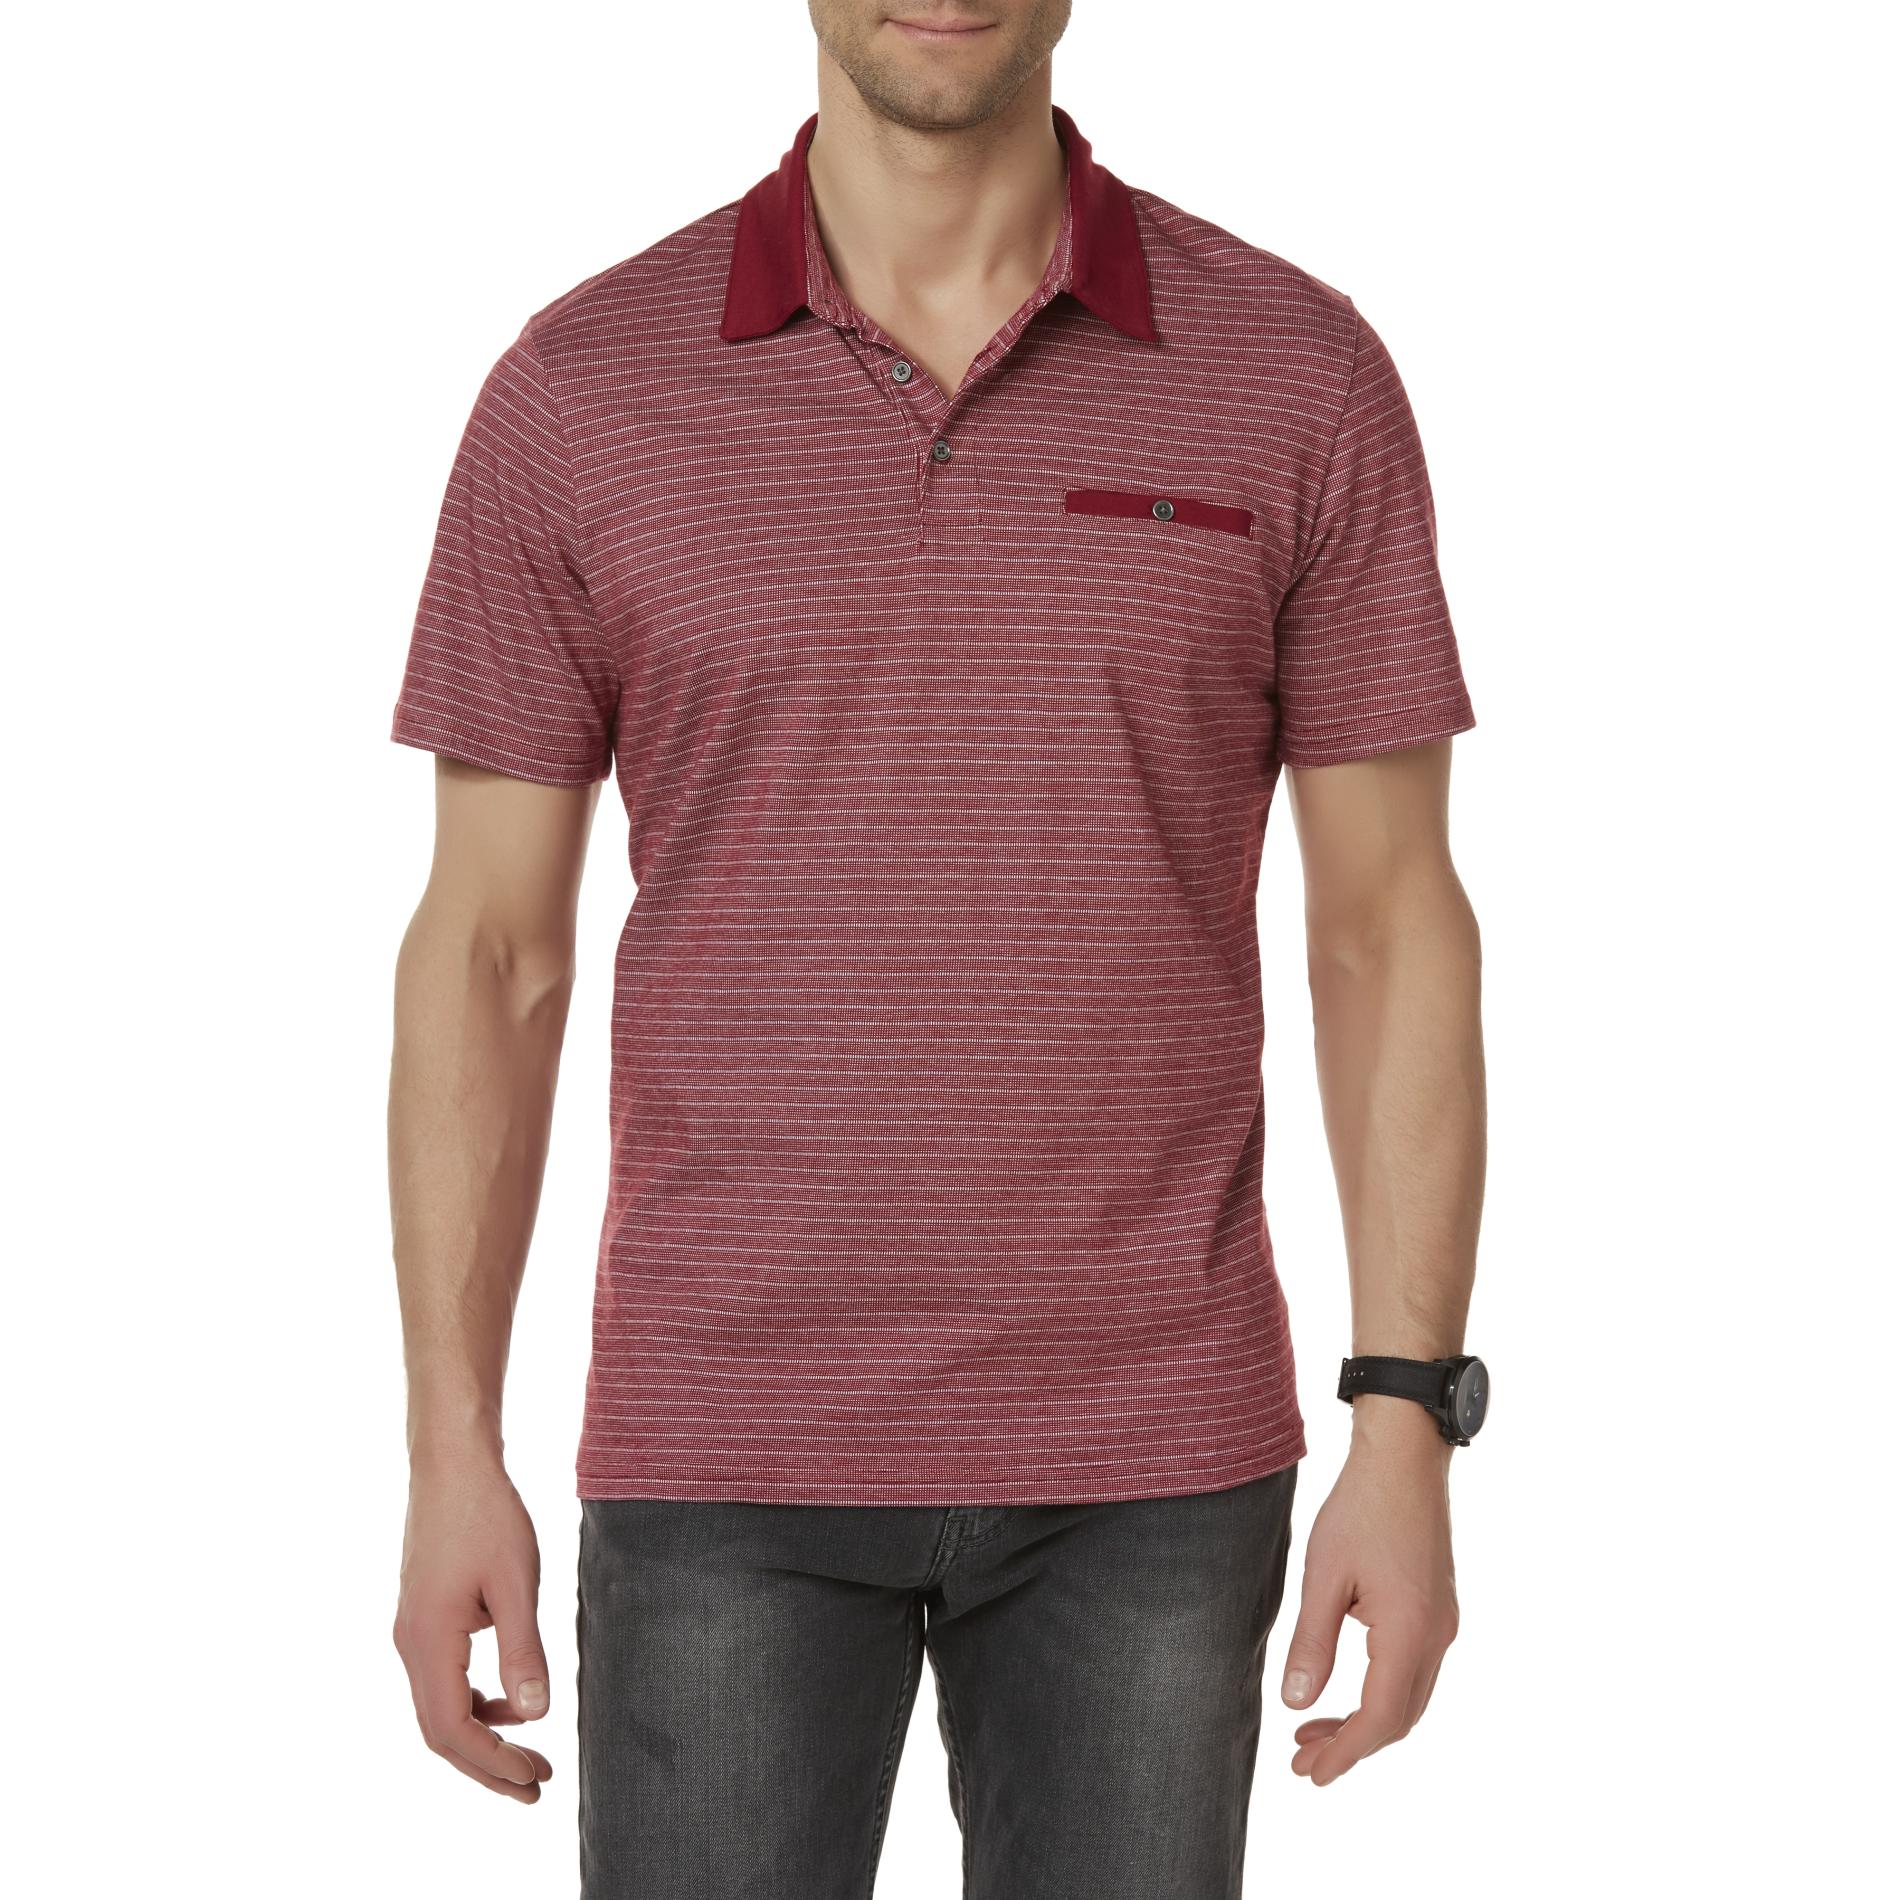 Structure Men's Pocket Polo Shirt - Striped